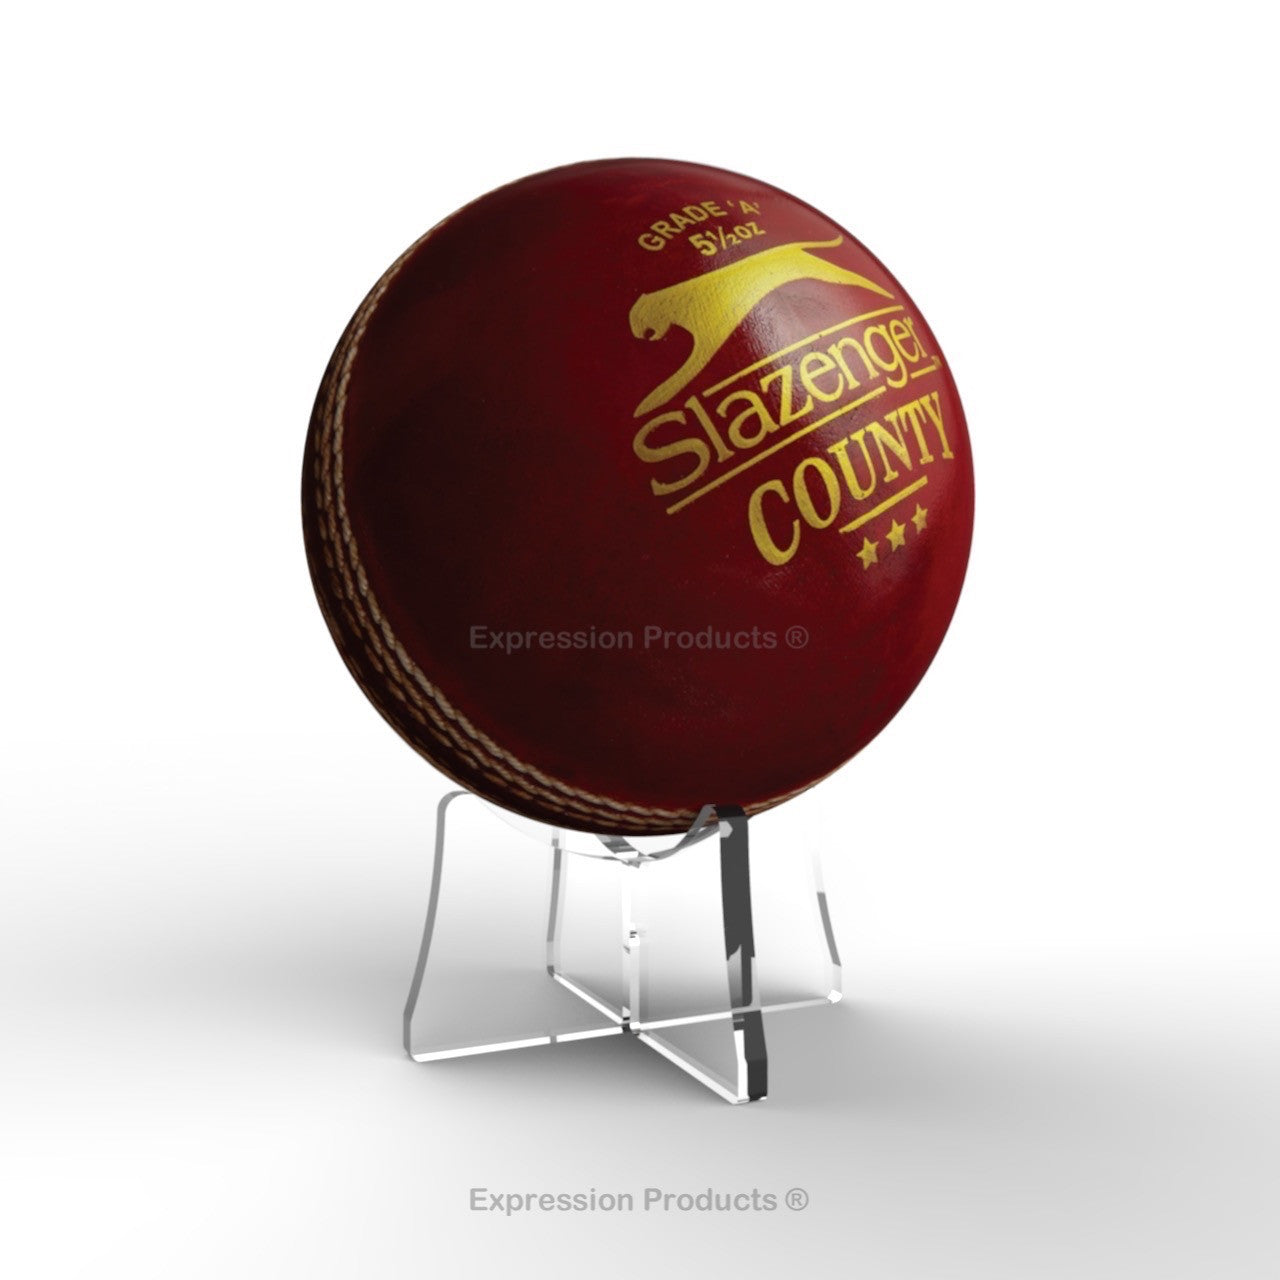 Cricket Ball Display Stand - Expression Products Ltd